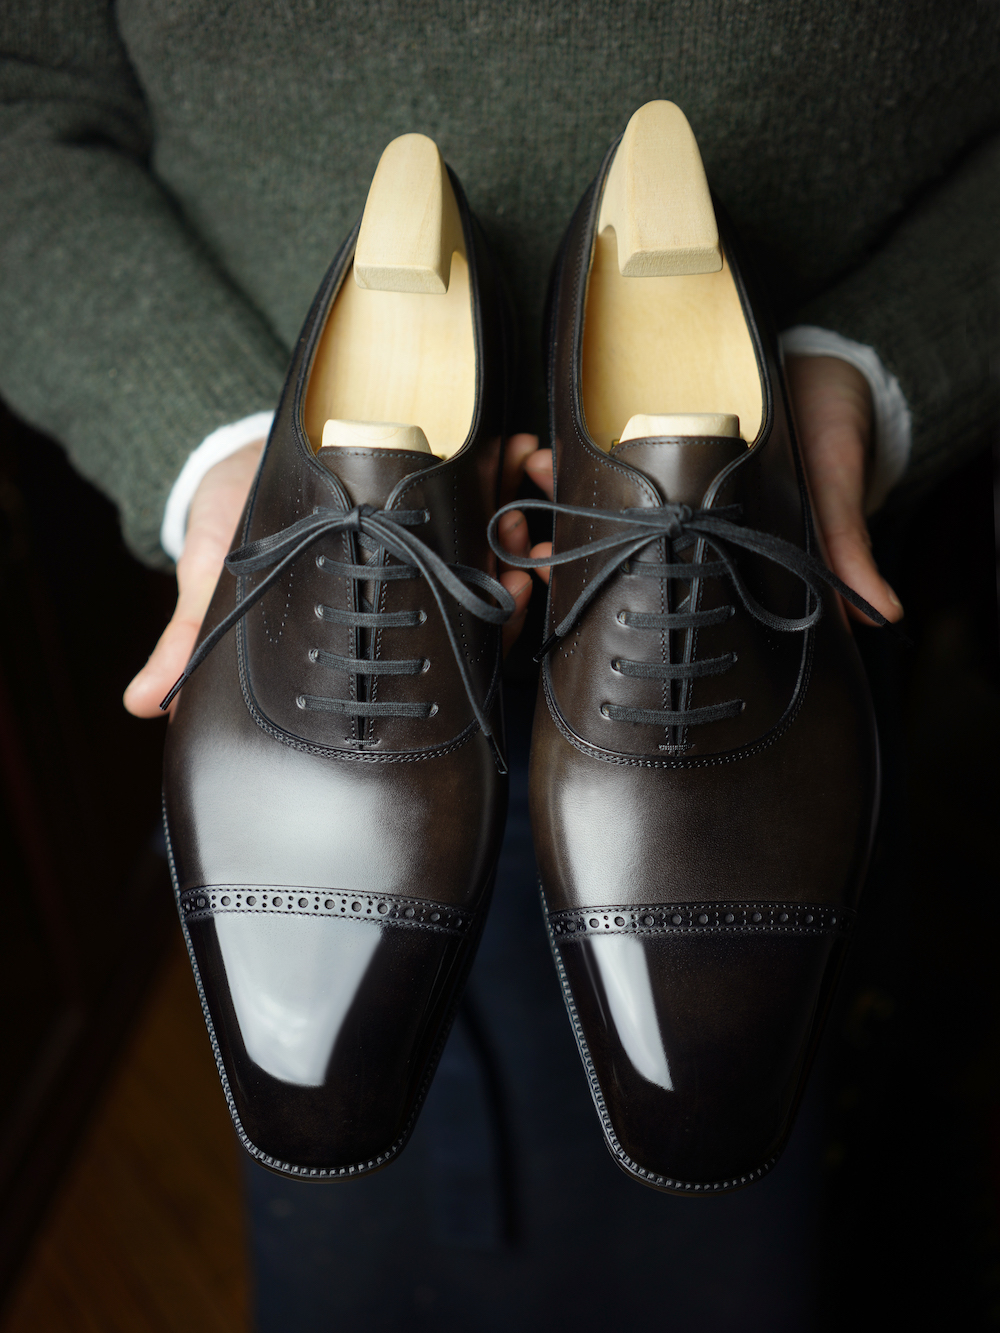 marquess bespoke shoes cost